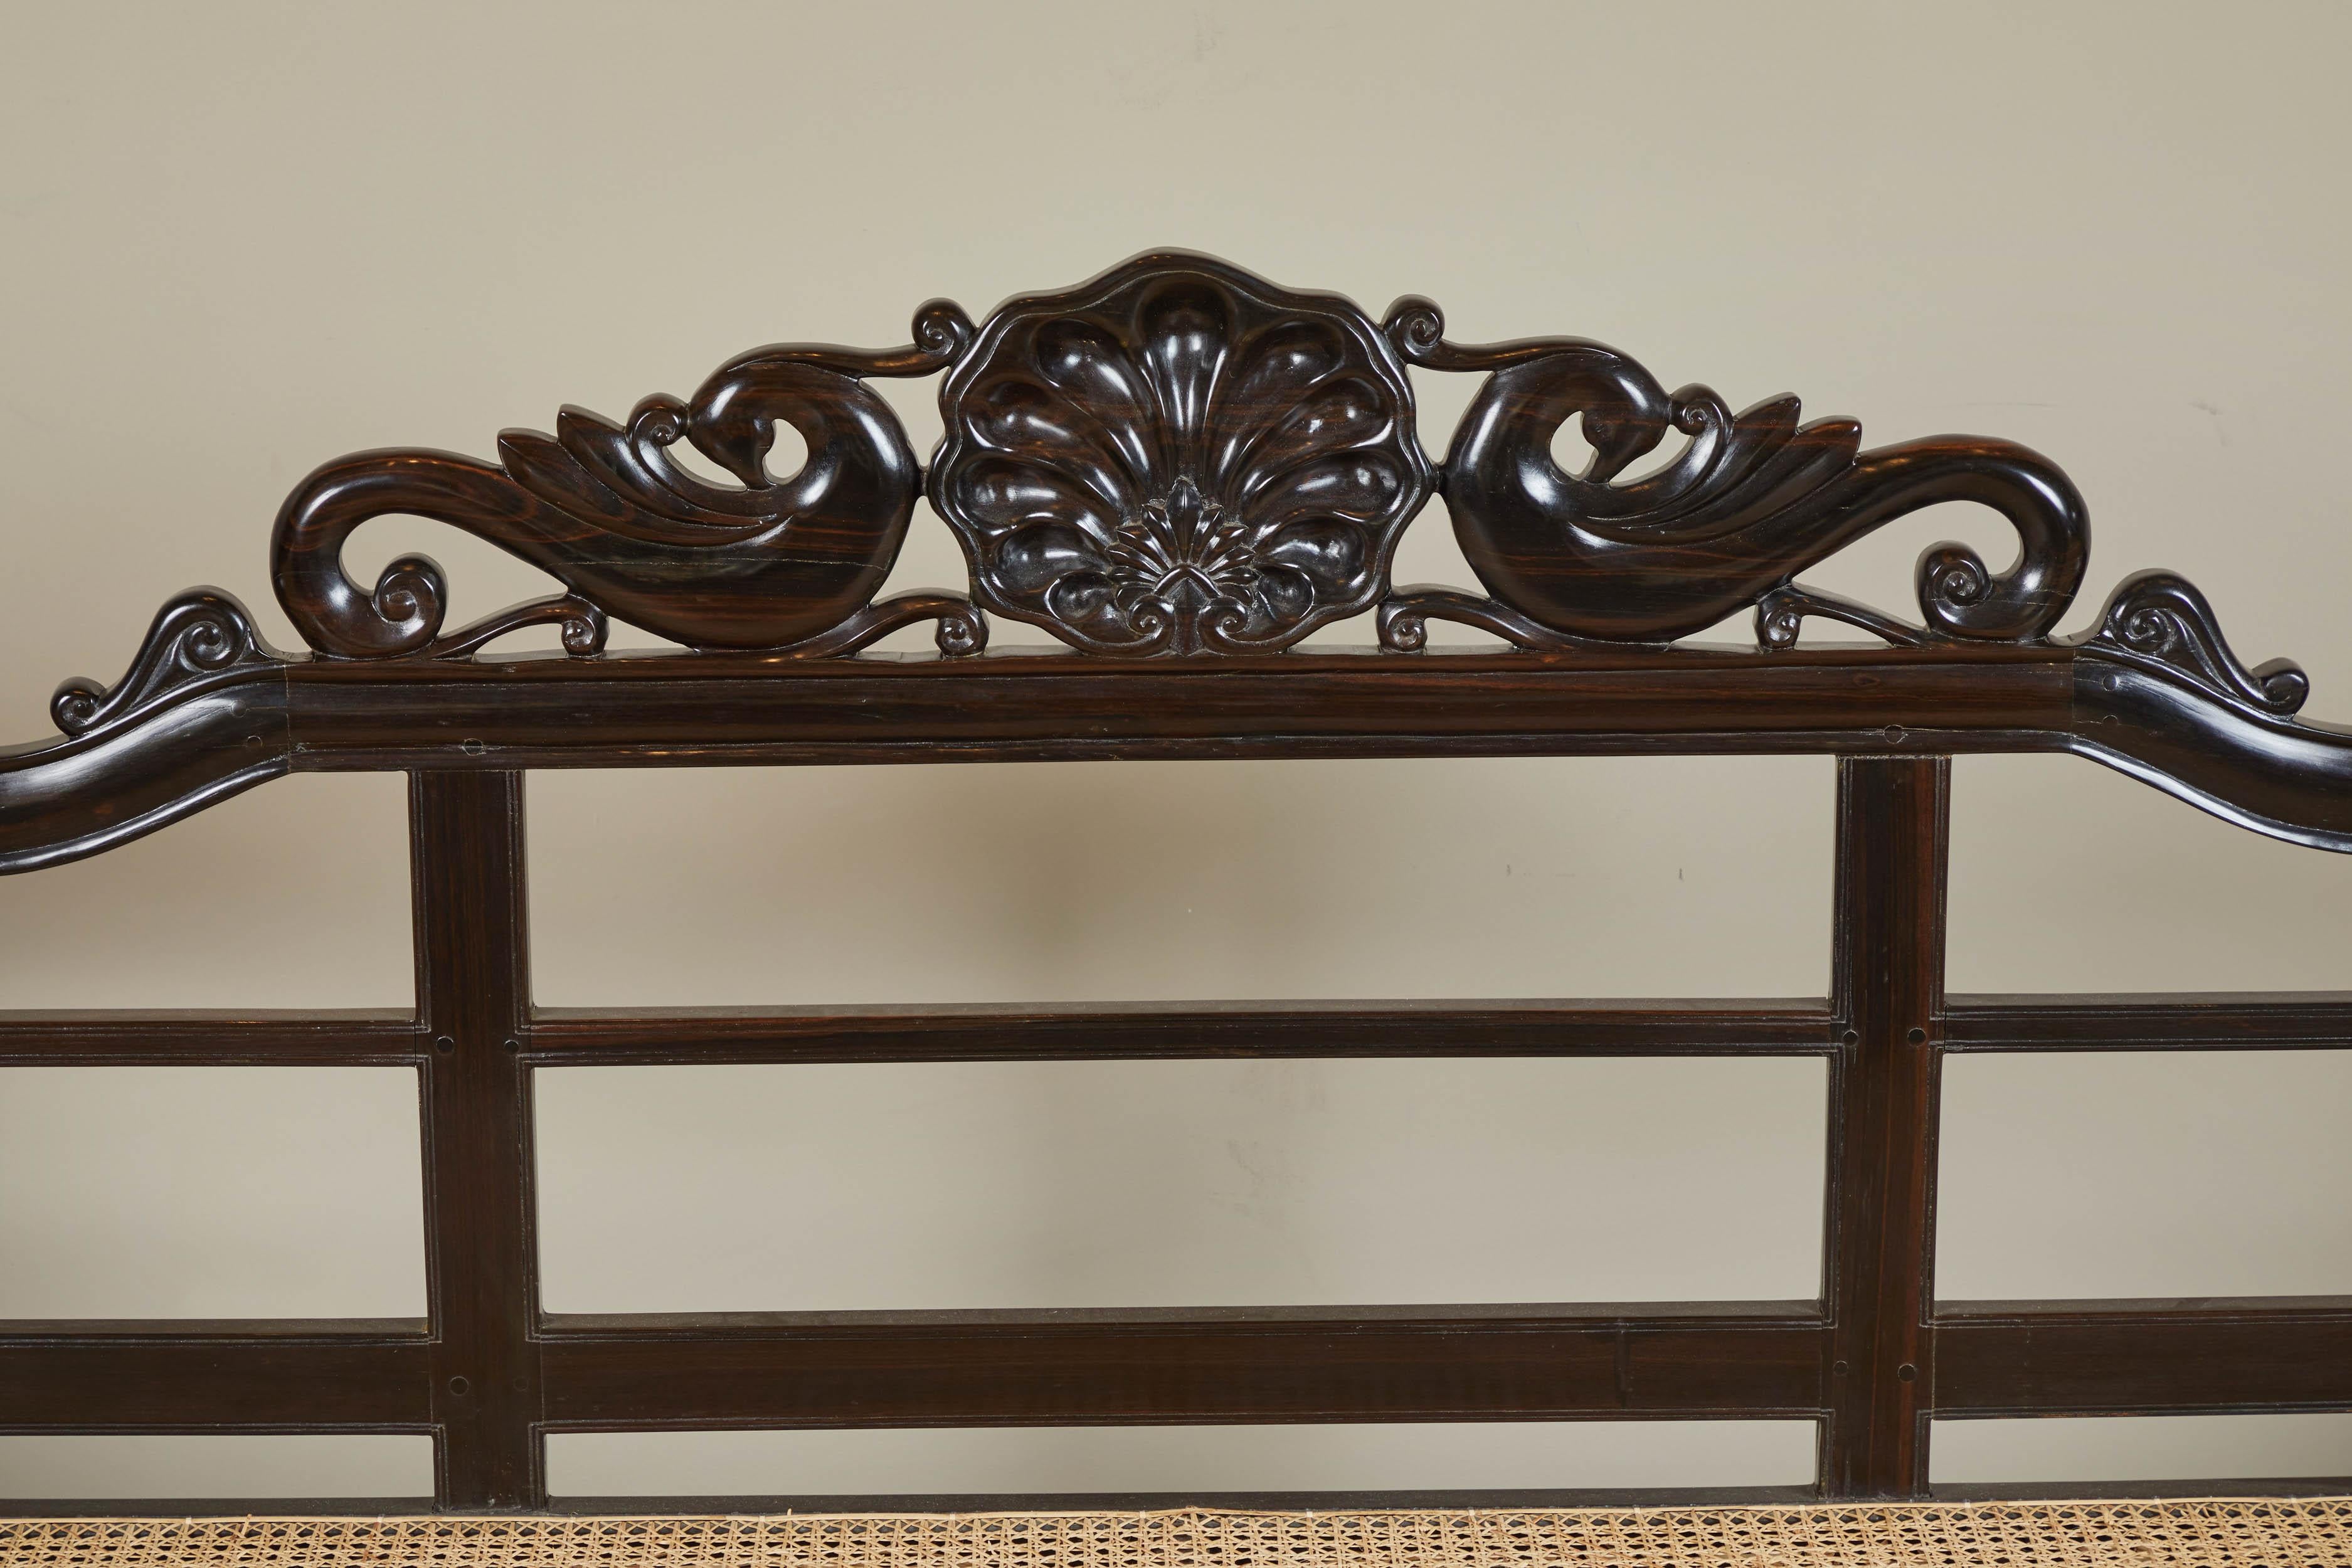 20th Century British Colonial Ebony Bench with Caned Seat and Arms 4